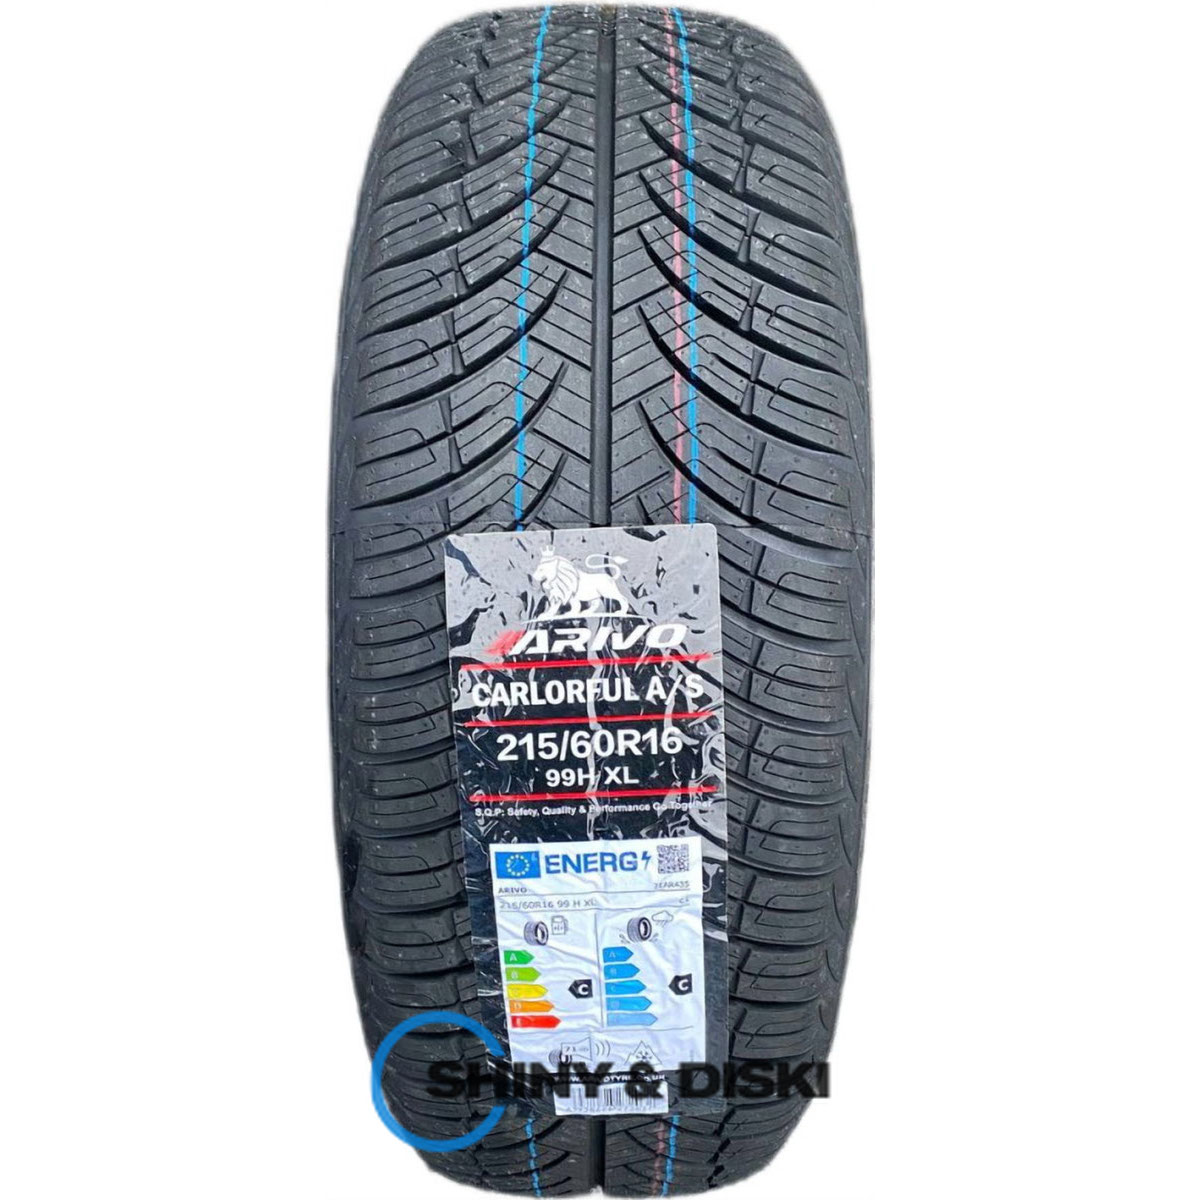 покрышки arivo carlorful a/s 255/55 r18 105v